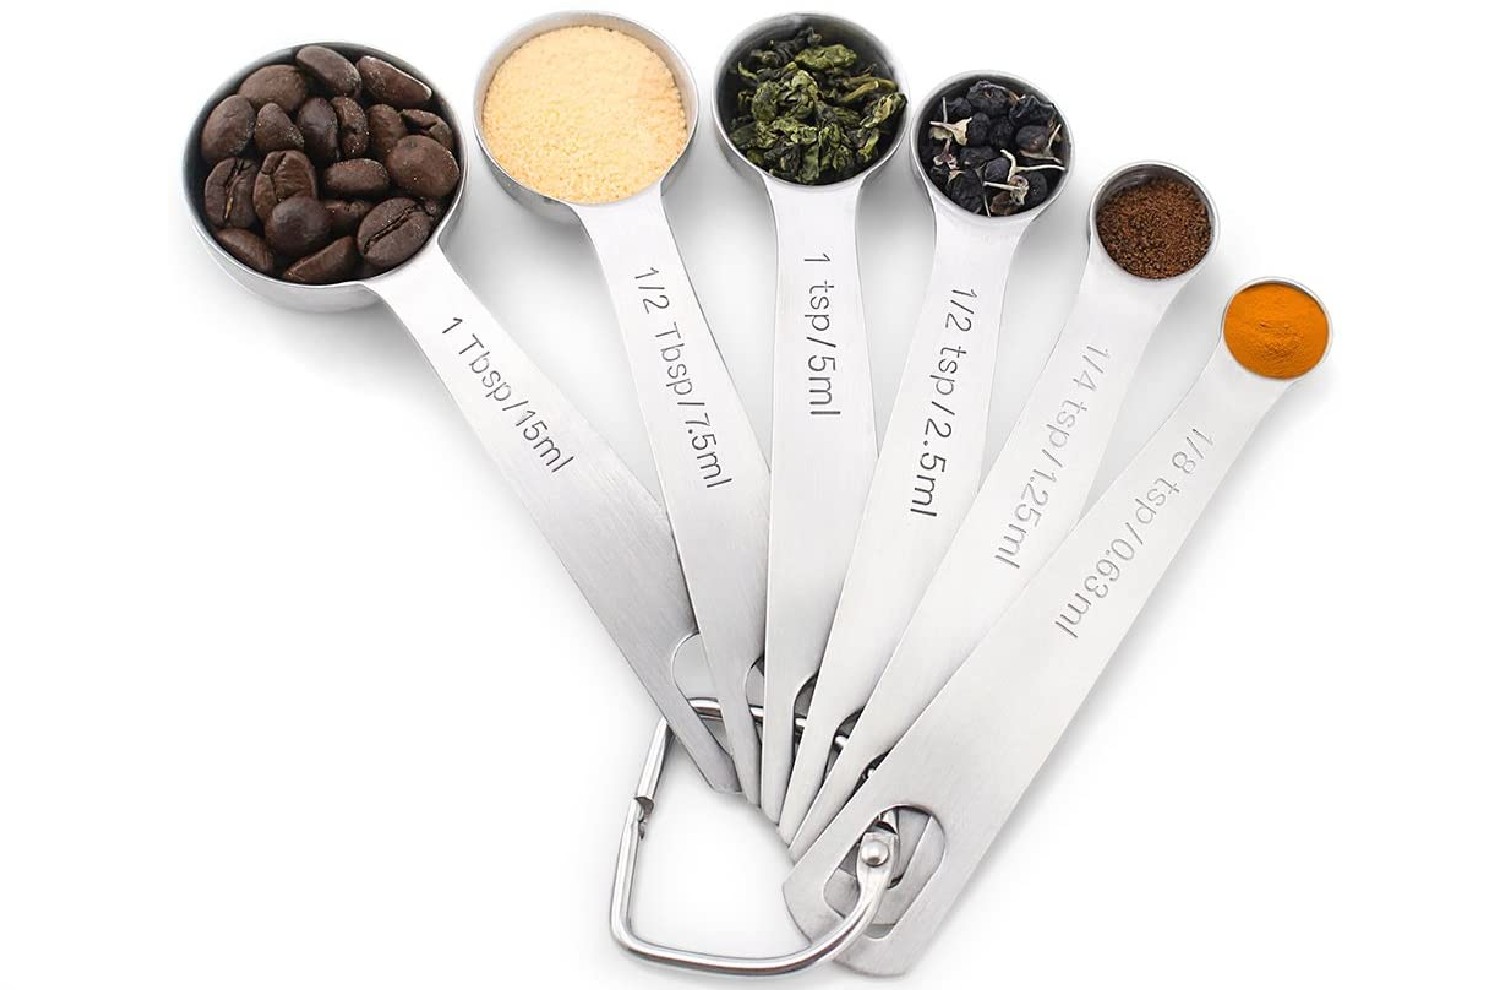 The Best Measuring Spoons of 2020 for Baking, Spice Sprinkling, and More